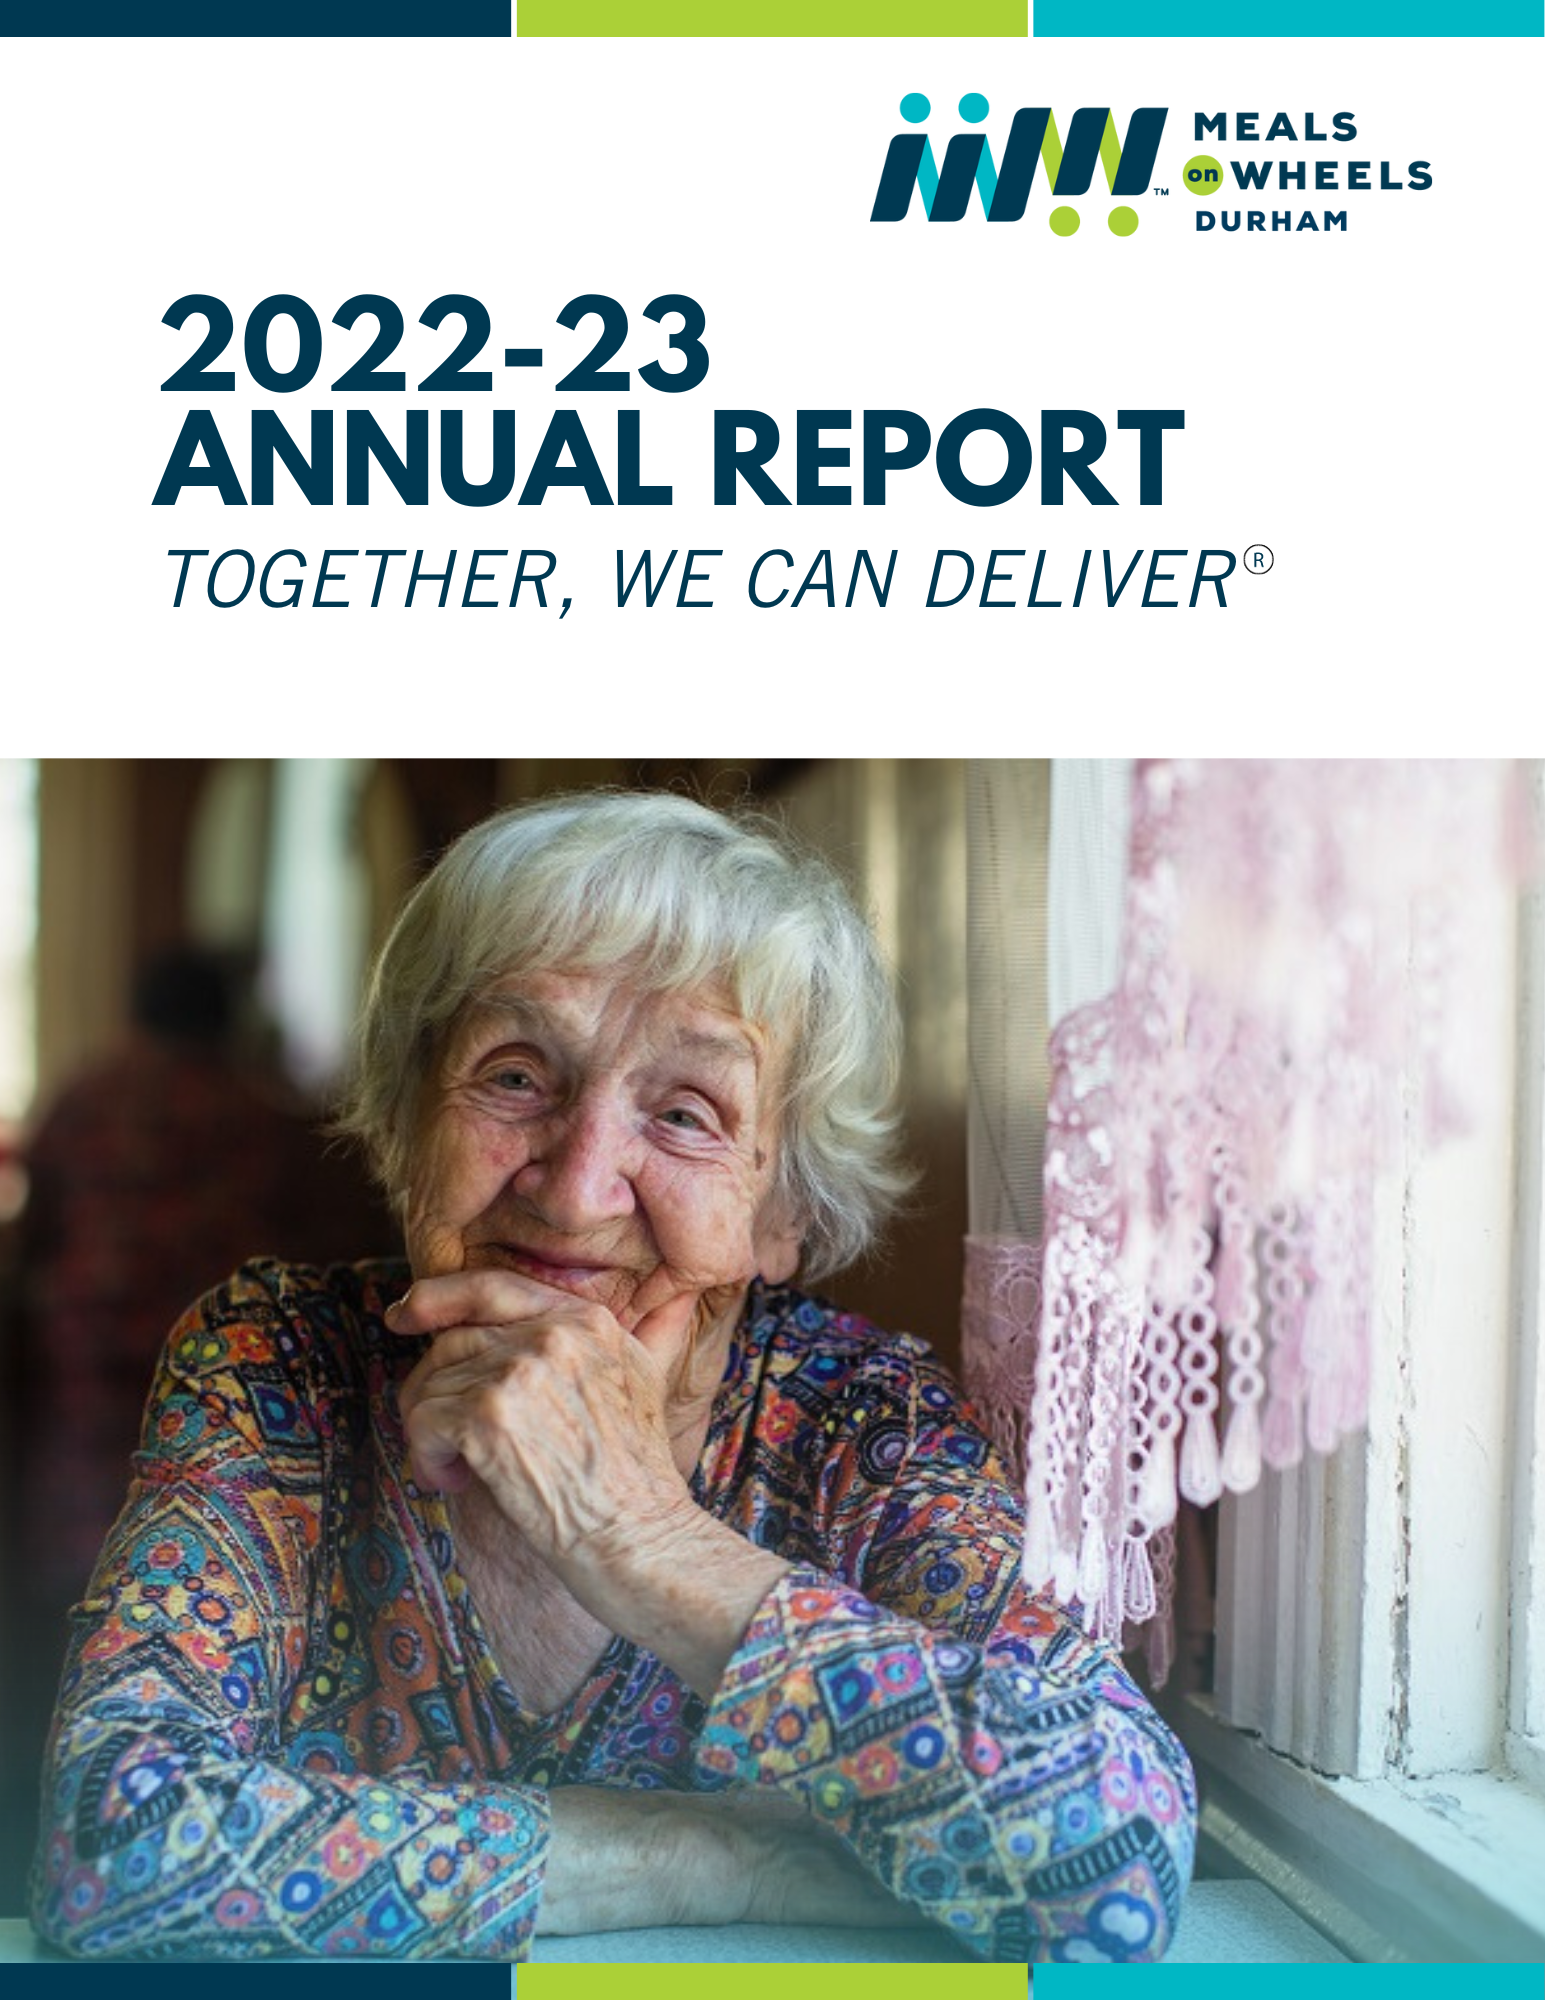 Meals on Wheels Durham FY22-23 Annual Report